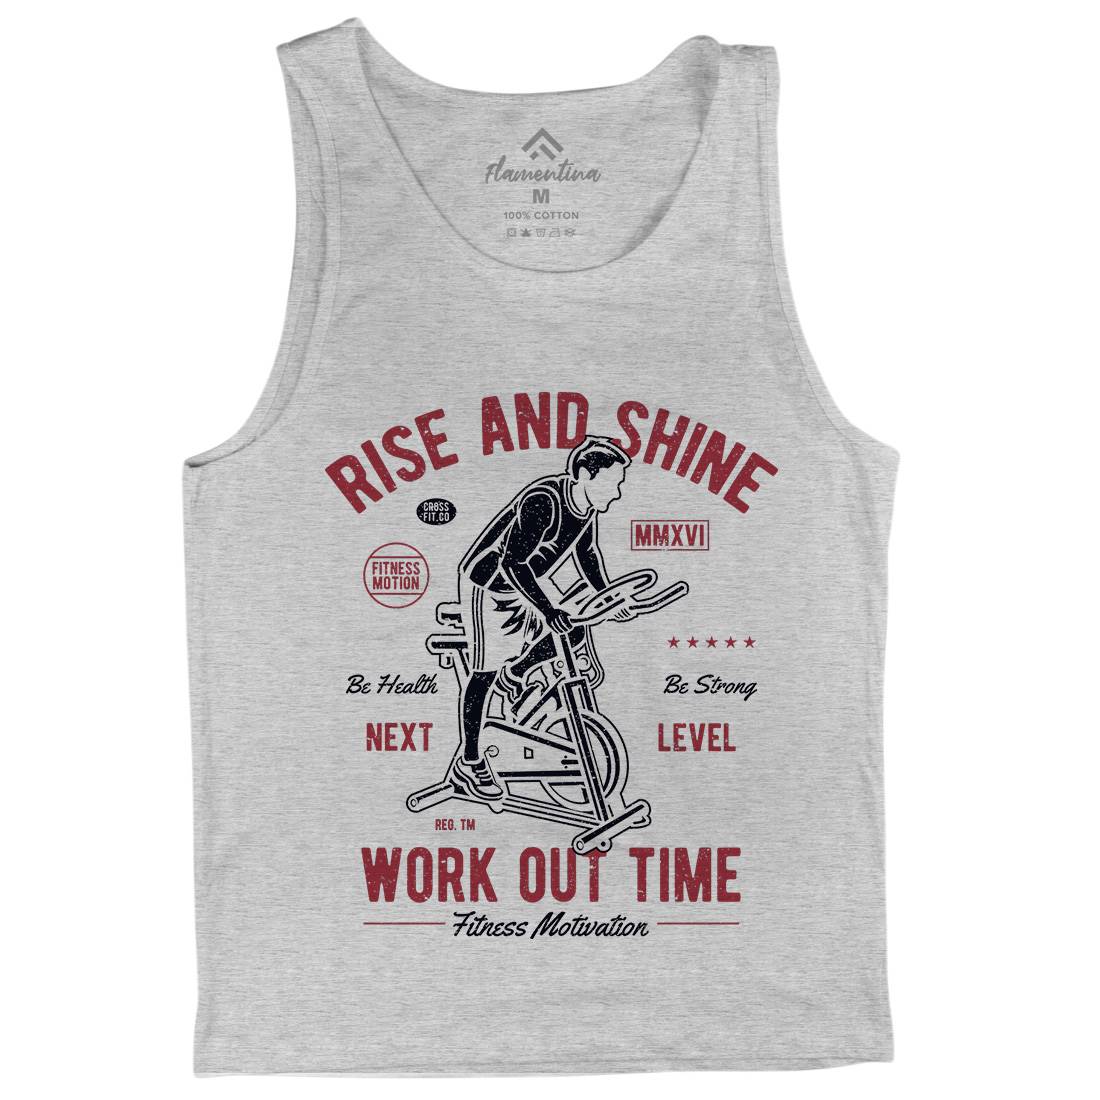 Work Out Time Mens Tank Top Vest Gym A199